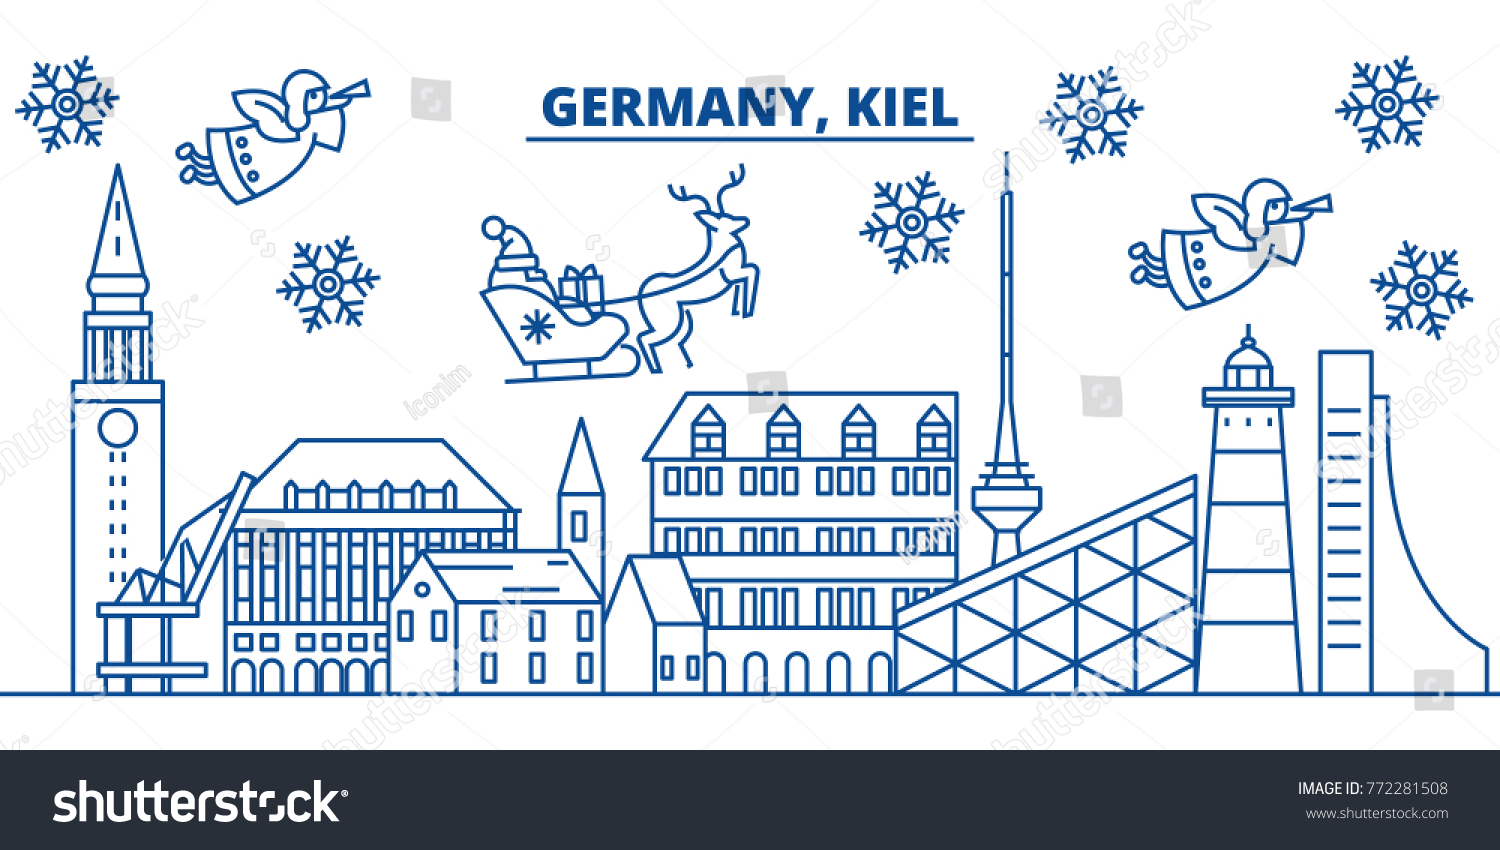 Germany Kiel winter city skyline Merry Christmas Happy New Year decorated banner with